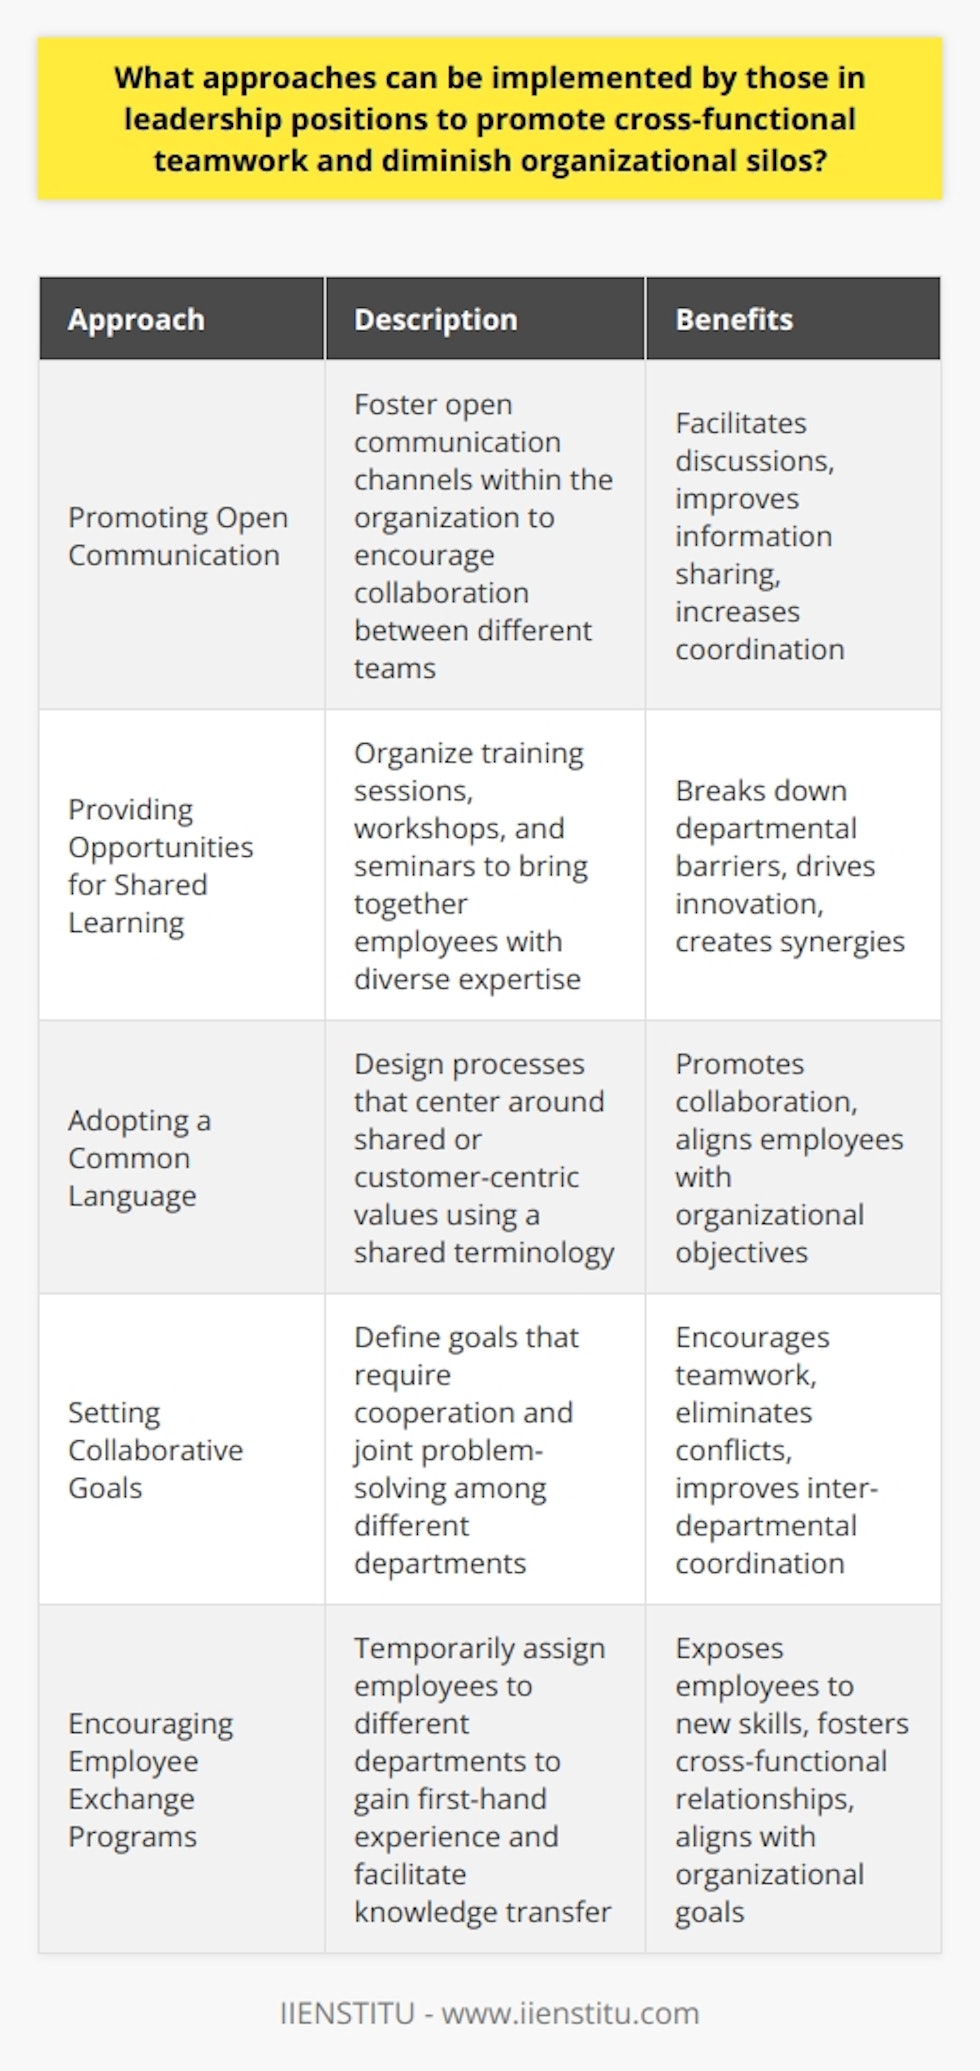 Promoting cross-functional teamwork and reducing organizational silos requires effective leadership approaches. Open communication channels should be fostered within the organization, encouraging the use of collaborative tools and platforms to facilitate discussions between different teams. Company-wide initiatives that promote collaboration can also enable employees to work together towards common goals.One approach to fostering cross-functional teamwork is to provide opportunities for shared learning among employees with diverse expertise. Training sessions, workshops, and seminars can bring together individuals from various functional areas, breaking down barriers between departments, driving innovation, and creating synergies among cross-functional teams.Adopting a common language that unifies different teams under the same organizational identity can also help diminish silos. Leaders can design processes that center around shared or customer-centric values, using a shared terminology that resonates with employees from all departments. This alignment encourages collaboration and the utilization of collective knowledge to achieve organizational objectives.Setting collaborative goals that call for cooperation and joint problem-solving can further facilitate cross-functional teamwork. Collaborative objectives drive cross-departmental interactions and hold individuals accountable for shared outcomes. Aligning individual interests with organizational concerns can encourage inter-departmental coordination, eliminate conflicts, and improve overall teamwork.Another effective approach is to encourage employee exchange programs. By temporarily assigning employees to other departments, leaders can provide first-hand experience of working with different teams, exposing employees to new skills and facilitating knowledge transfer. This helps employees understand the broader organizational goals and fosters the development of cross-functional relationships.In summary, leaders can promote cross-functional teamwork and diminish organizational silos by prioritizing open communication, creating opportunities for shared learning, adopting a common language, developing collaborative goals, and encouraging employee exchange programs. These practices support the development of cross-functional teamwork, leading to increased innovation, enhanced productivity, and a reduction in organizational silos.